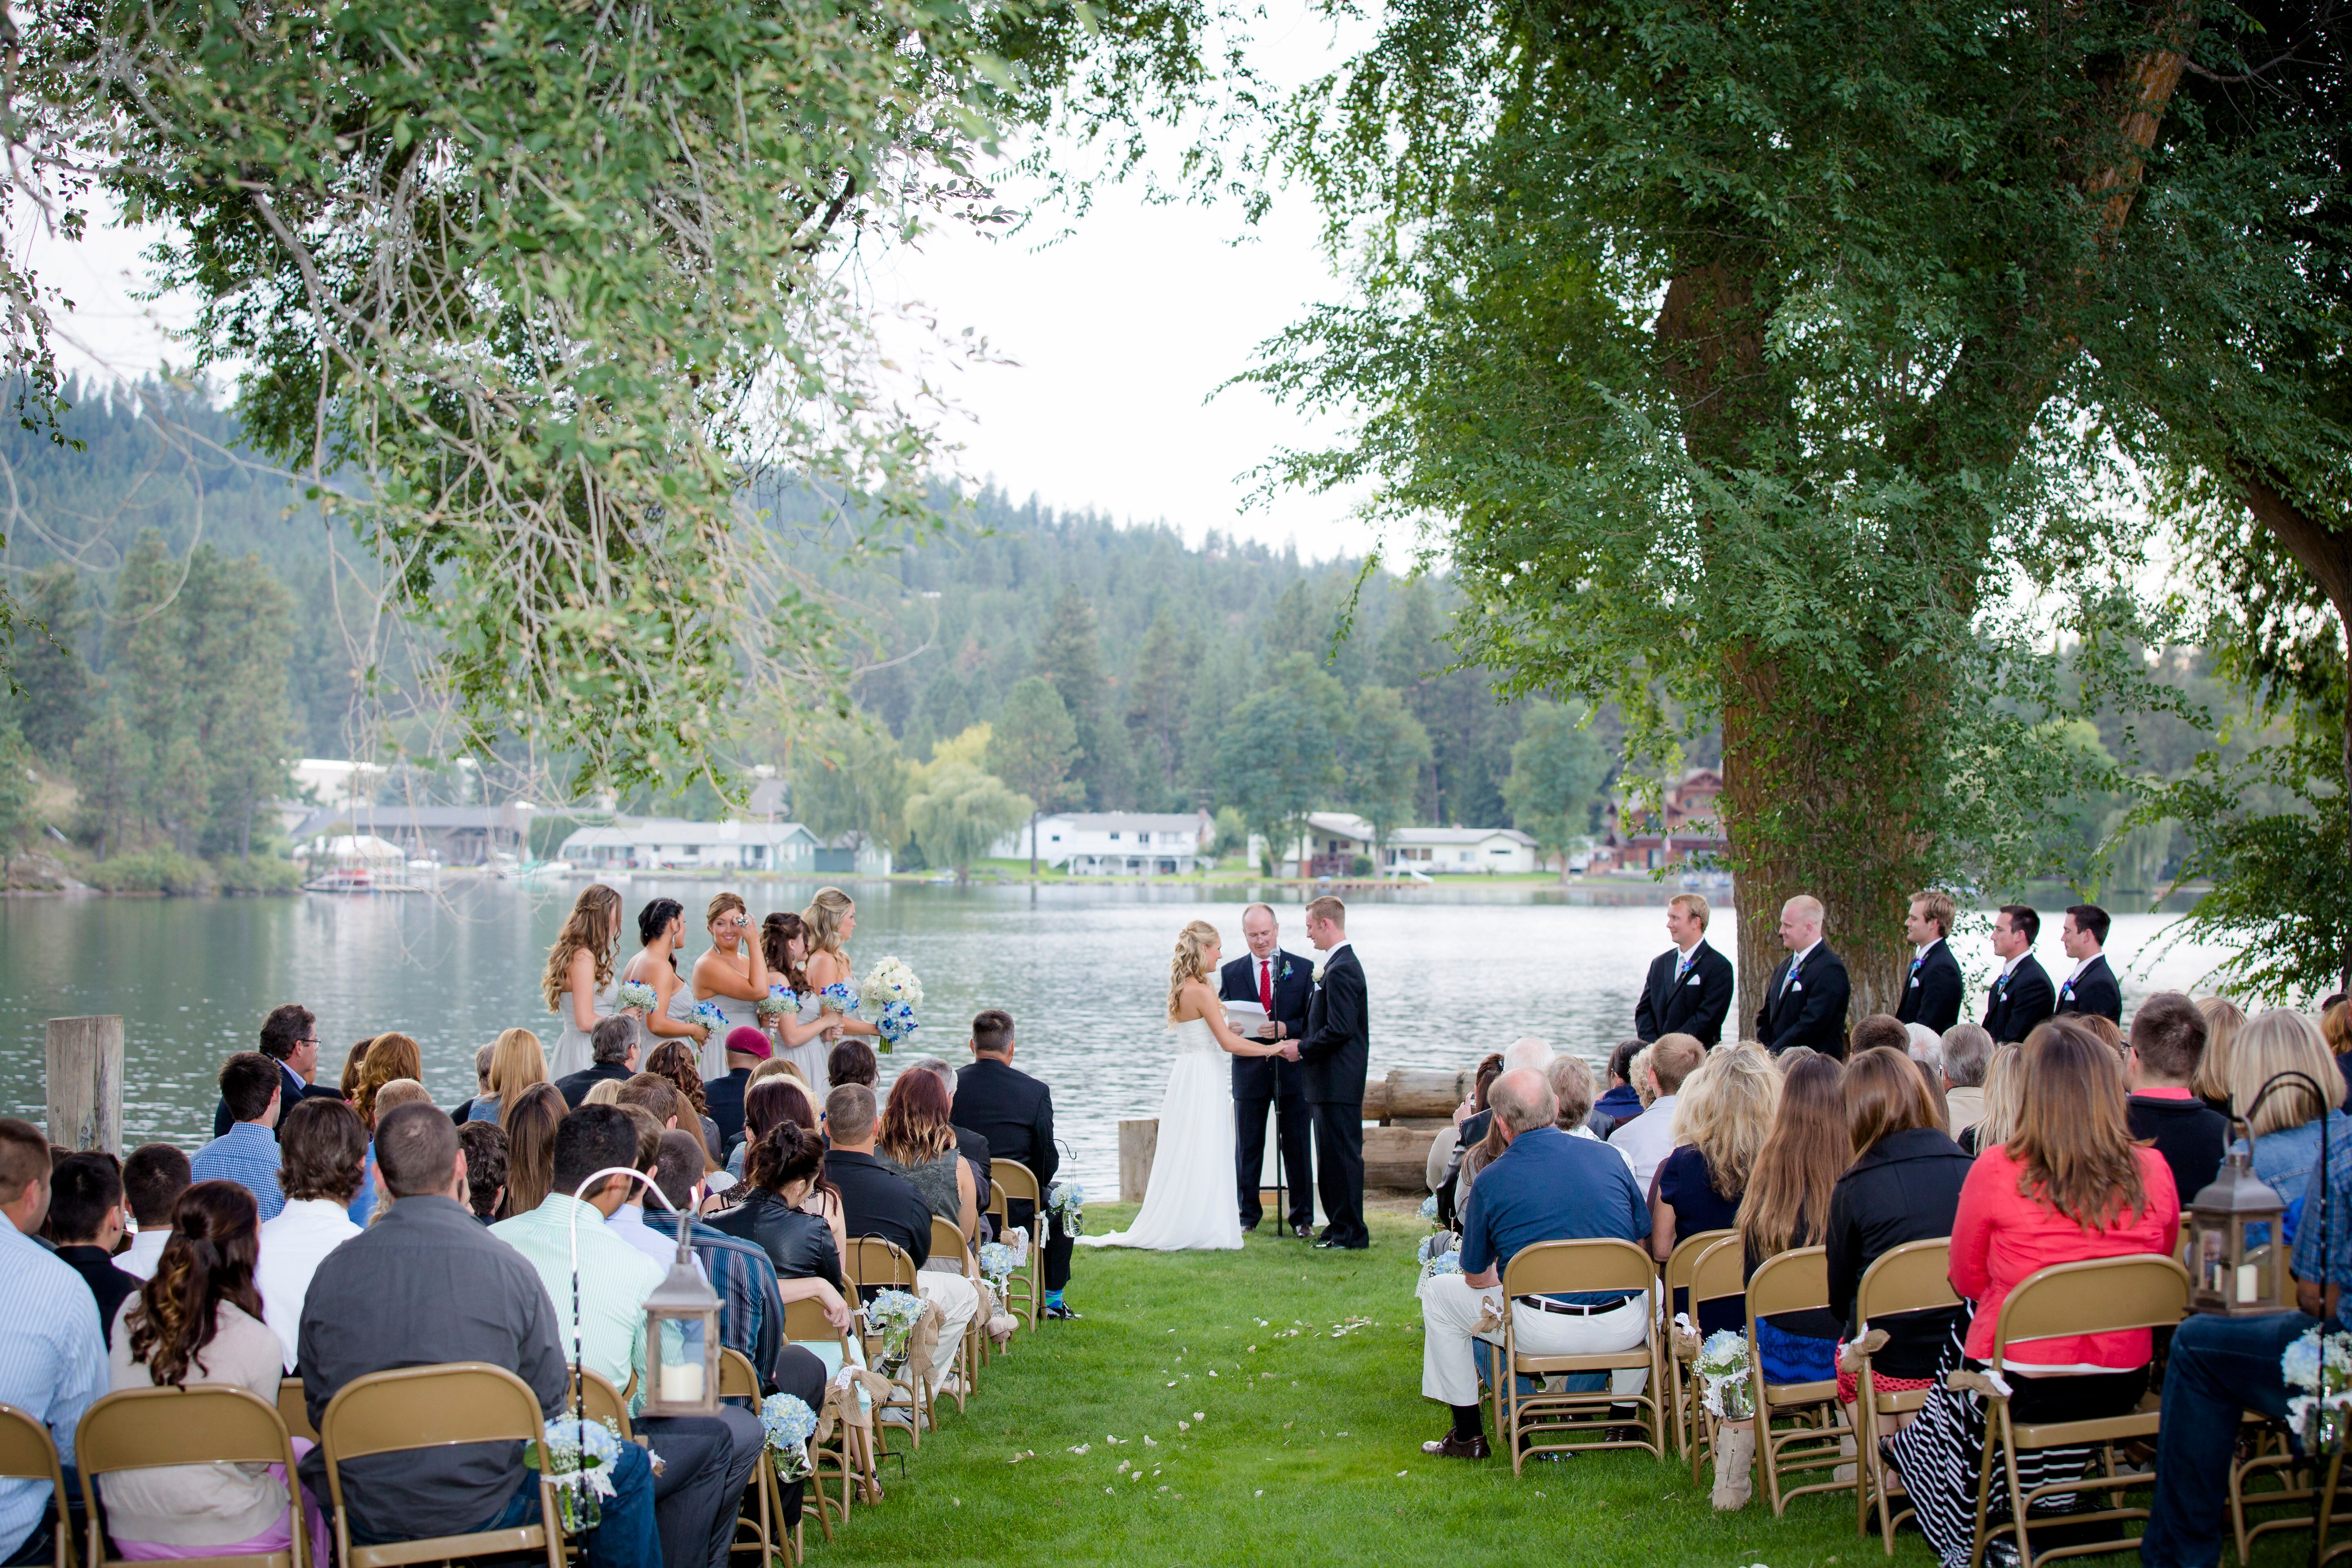 A Waterfront Ceremony in Post Falls, Idaho